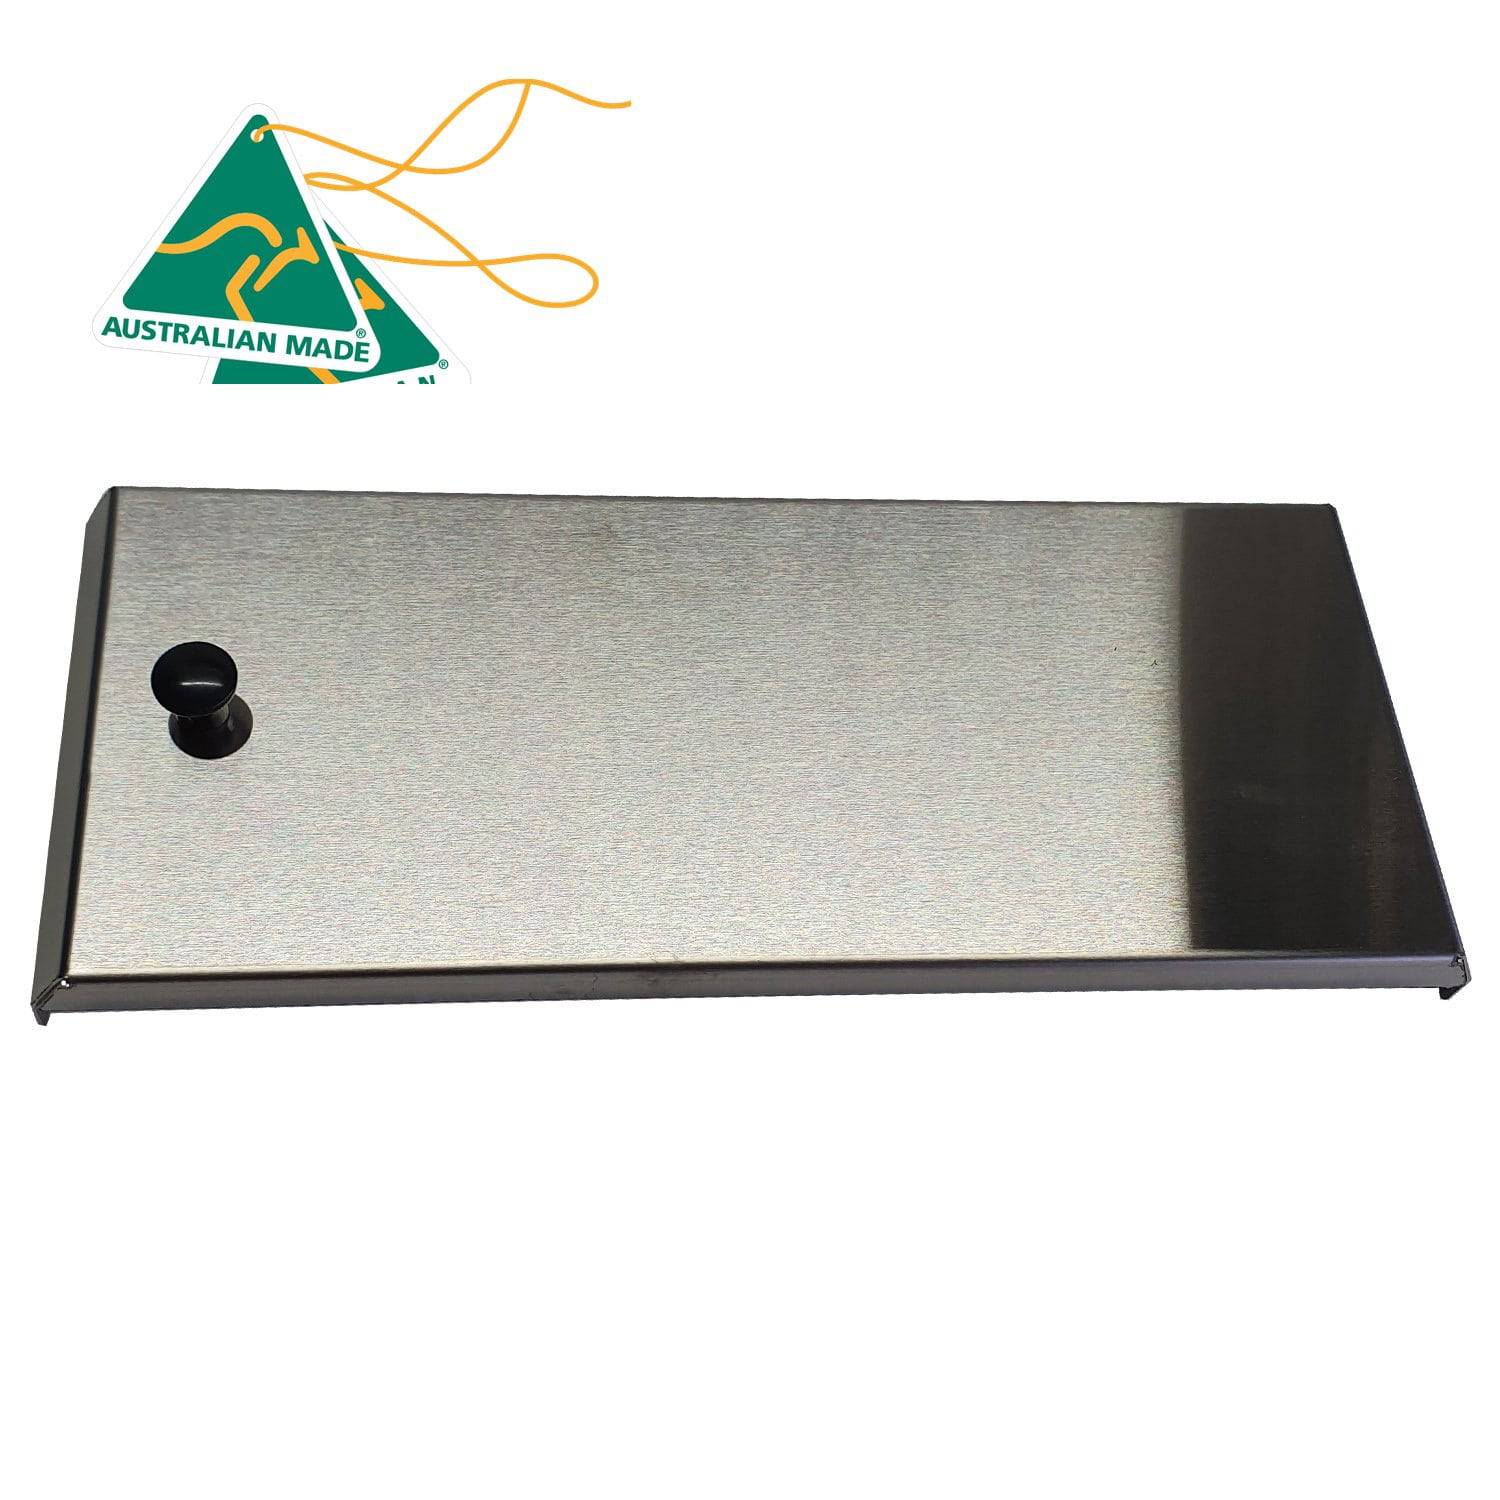 SMW Insulated Door for Travel Buddy Marine - No Latch (Larger Oven) | Somerville Metal Works